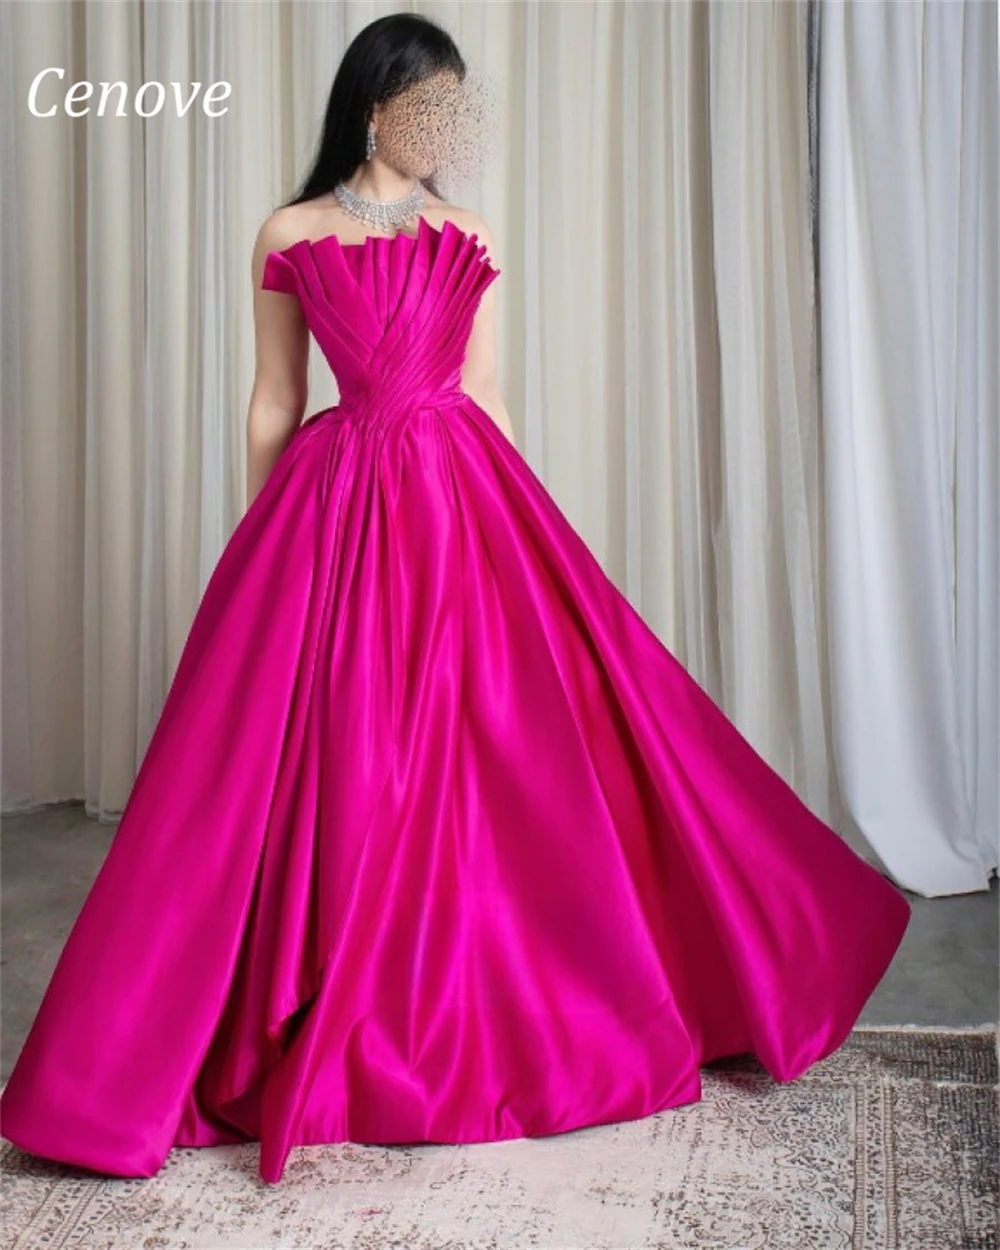 

Cenove A-Line Long Fold Evening Gown Formal Princess Strpless Elegant Backless Prom Red New Party Dresses for Women 2023